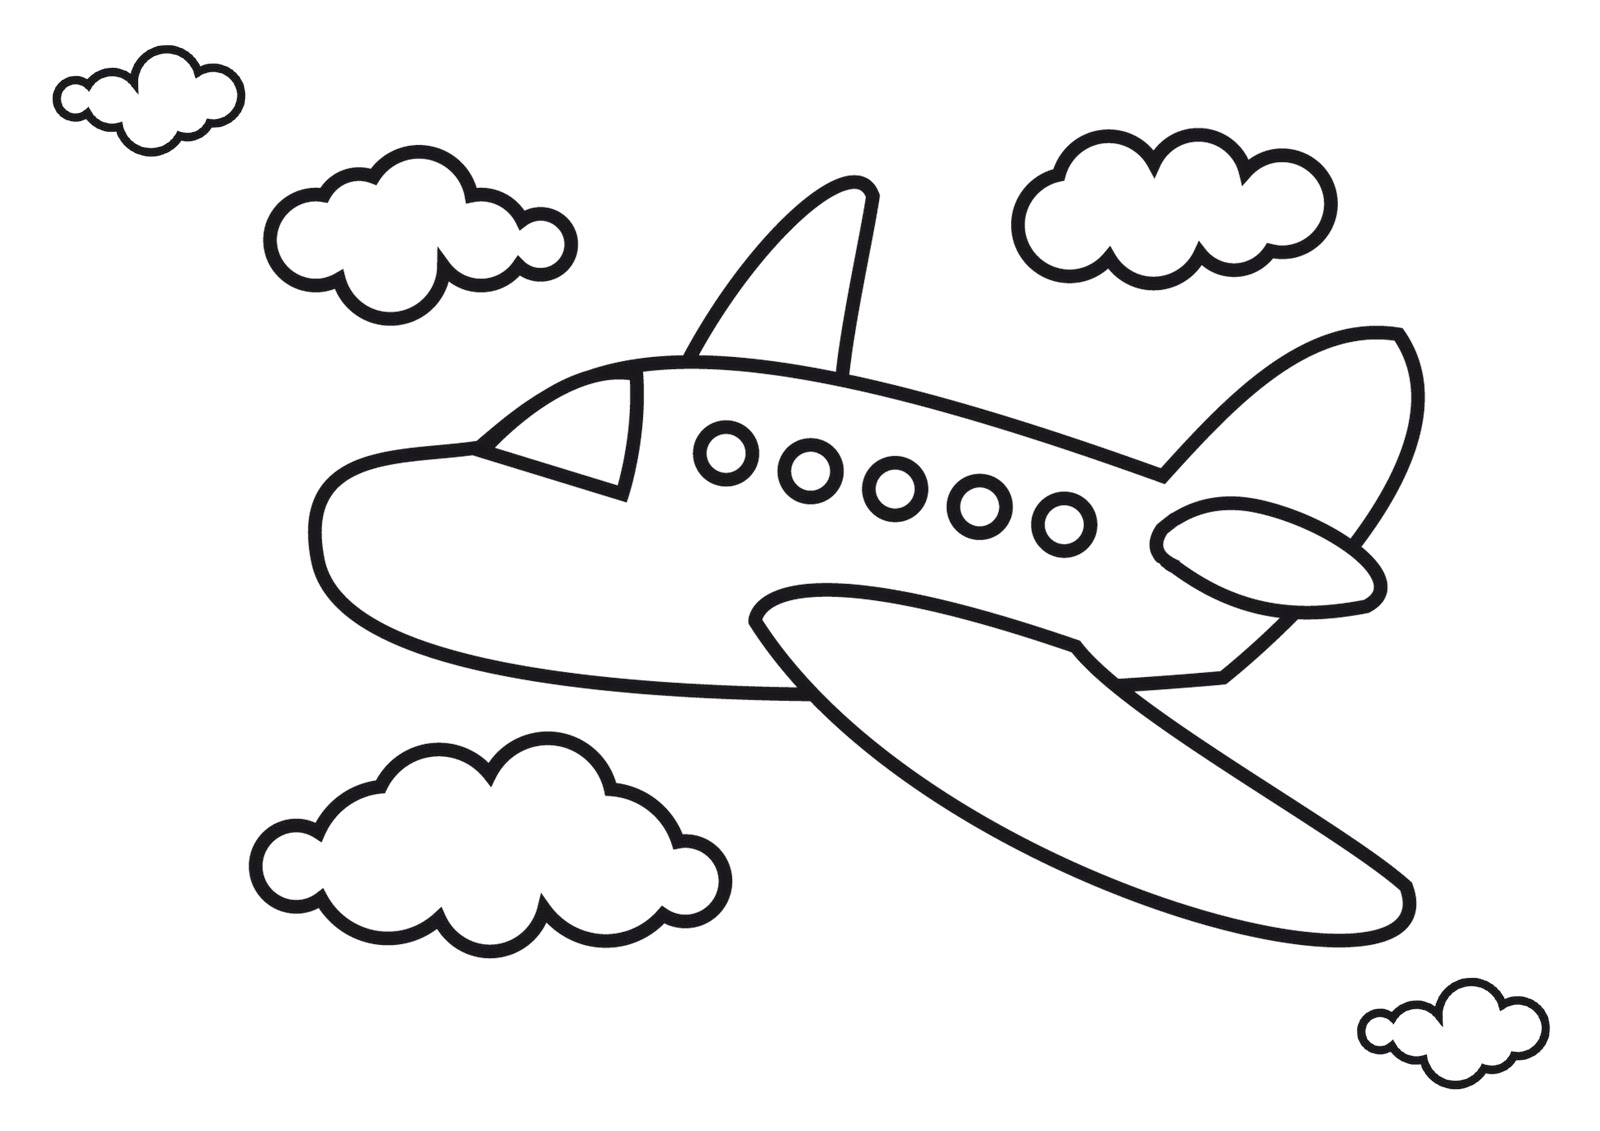 Airplane coloring pages for kids - Coloring Pages & Pictures - IMAGIXS